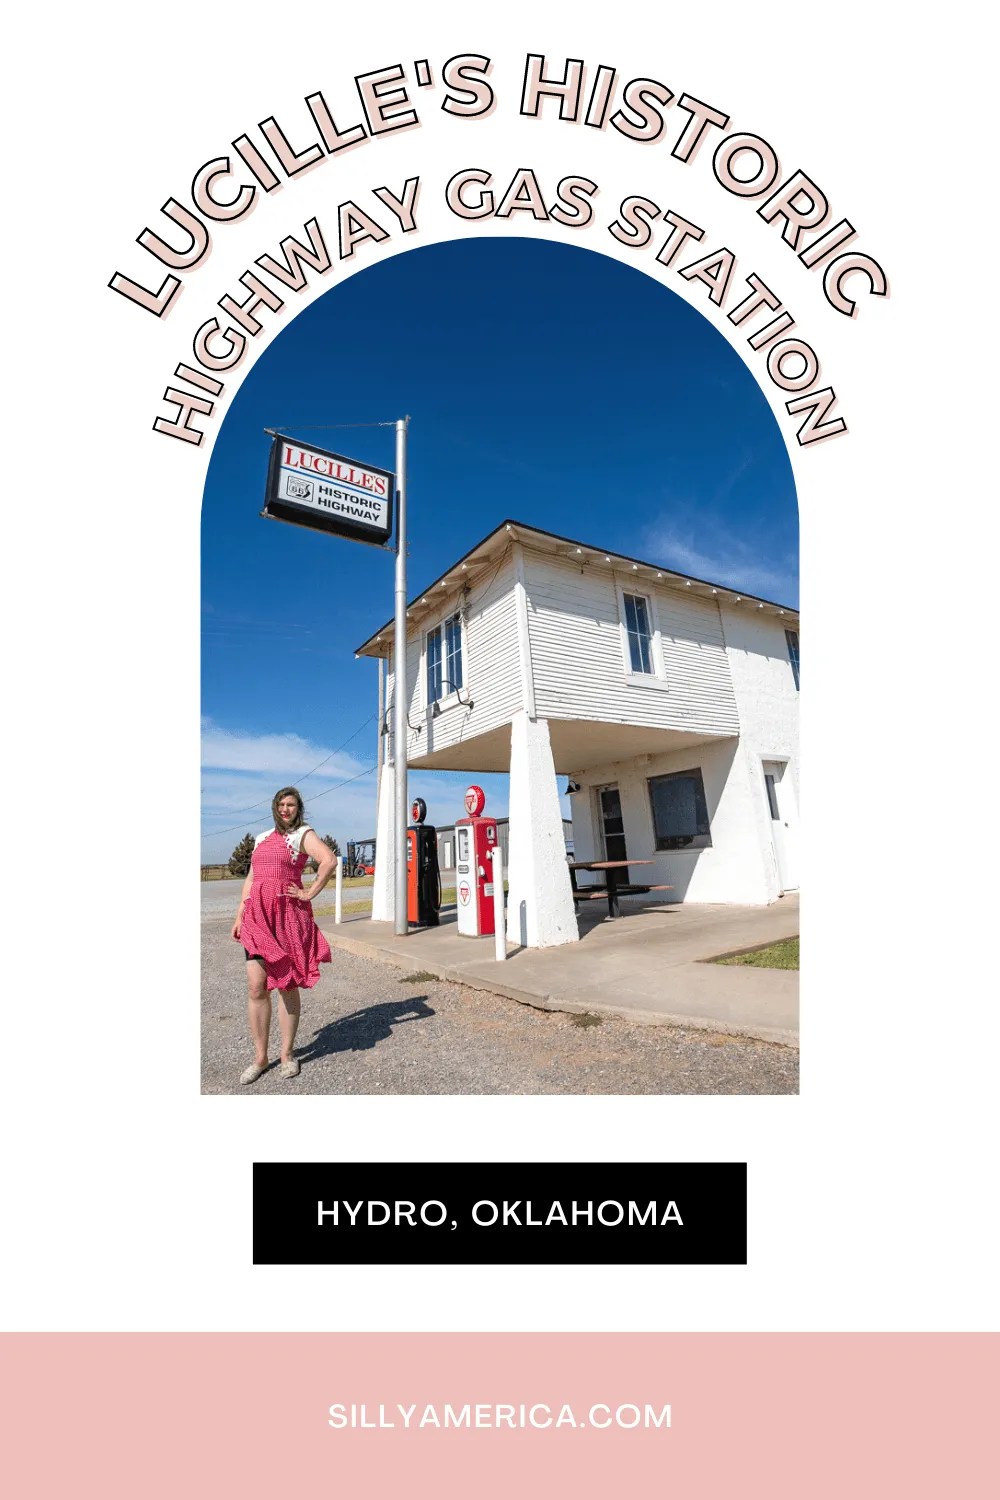 Officially known as the Provine Service Station, this vintage service station in Hydro, Oklahoma on Route 66 is more commonly known as Lucille's Historic Highway Gas Station or, simply, Lucille’s Place.  #RoadTrips #RoadTripStop #Route66 #Route66RoadTrip #OklahomaRoute66 #Oklahoma #OklahomaRoadTrip #OklahomaRoadsideAttractions #RoadsideAttractions #RoadsideAttraction #RoadsideAmerica #RoadTrip